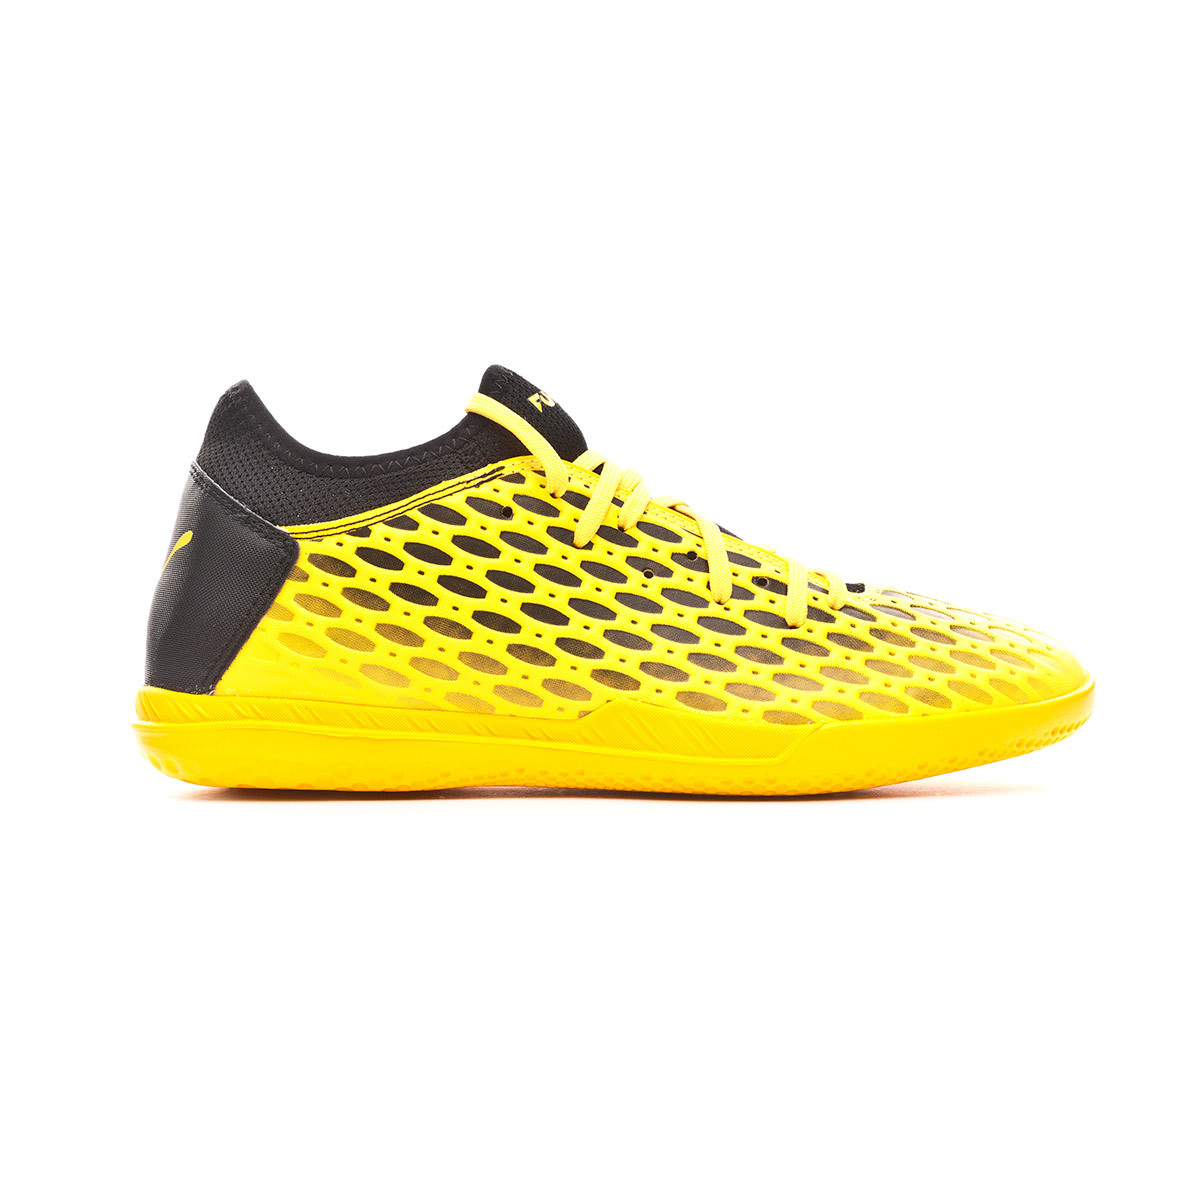 puma yellow and black shoes